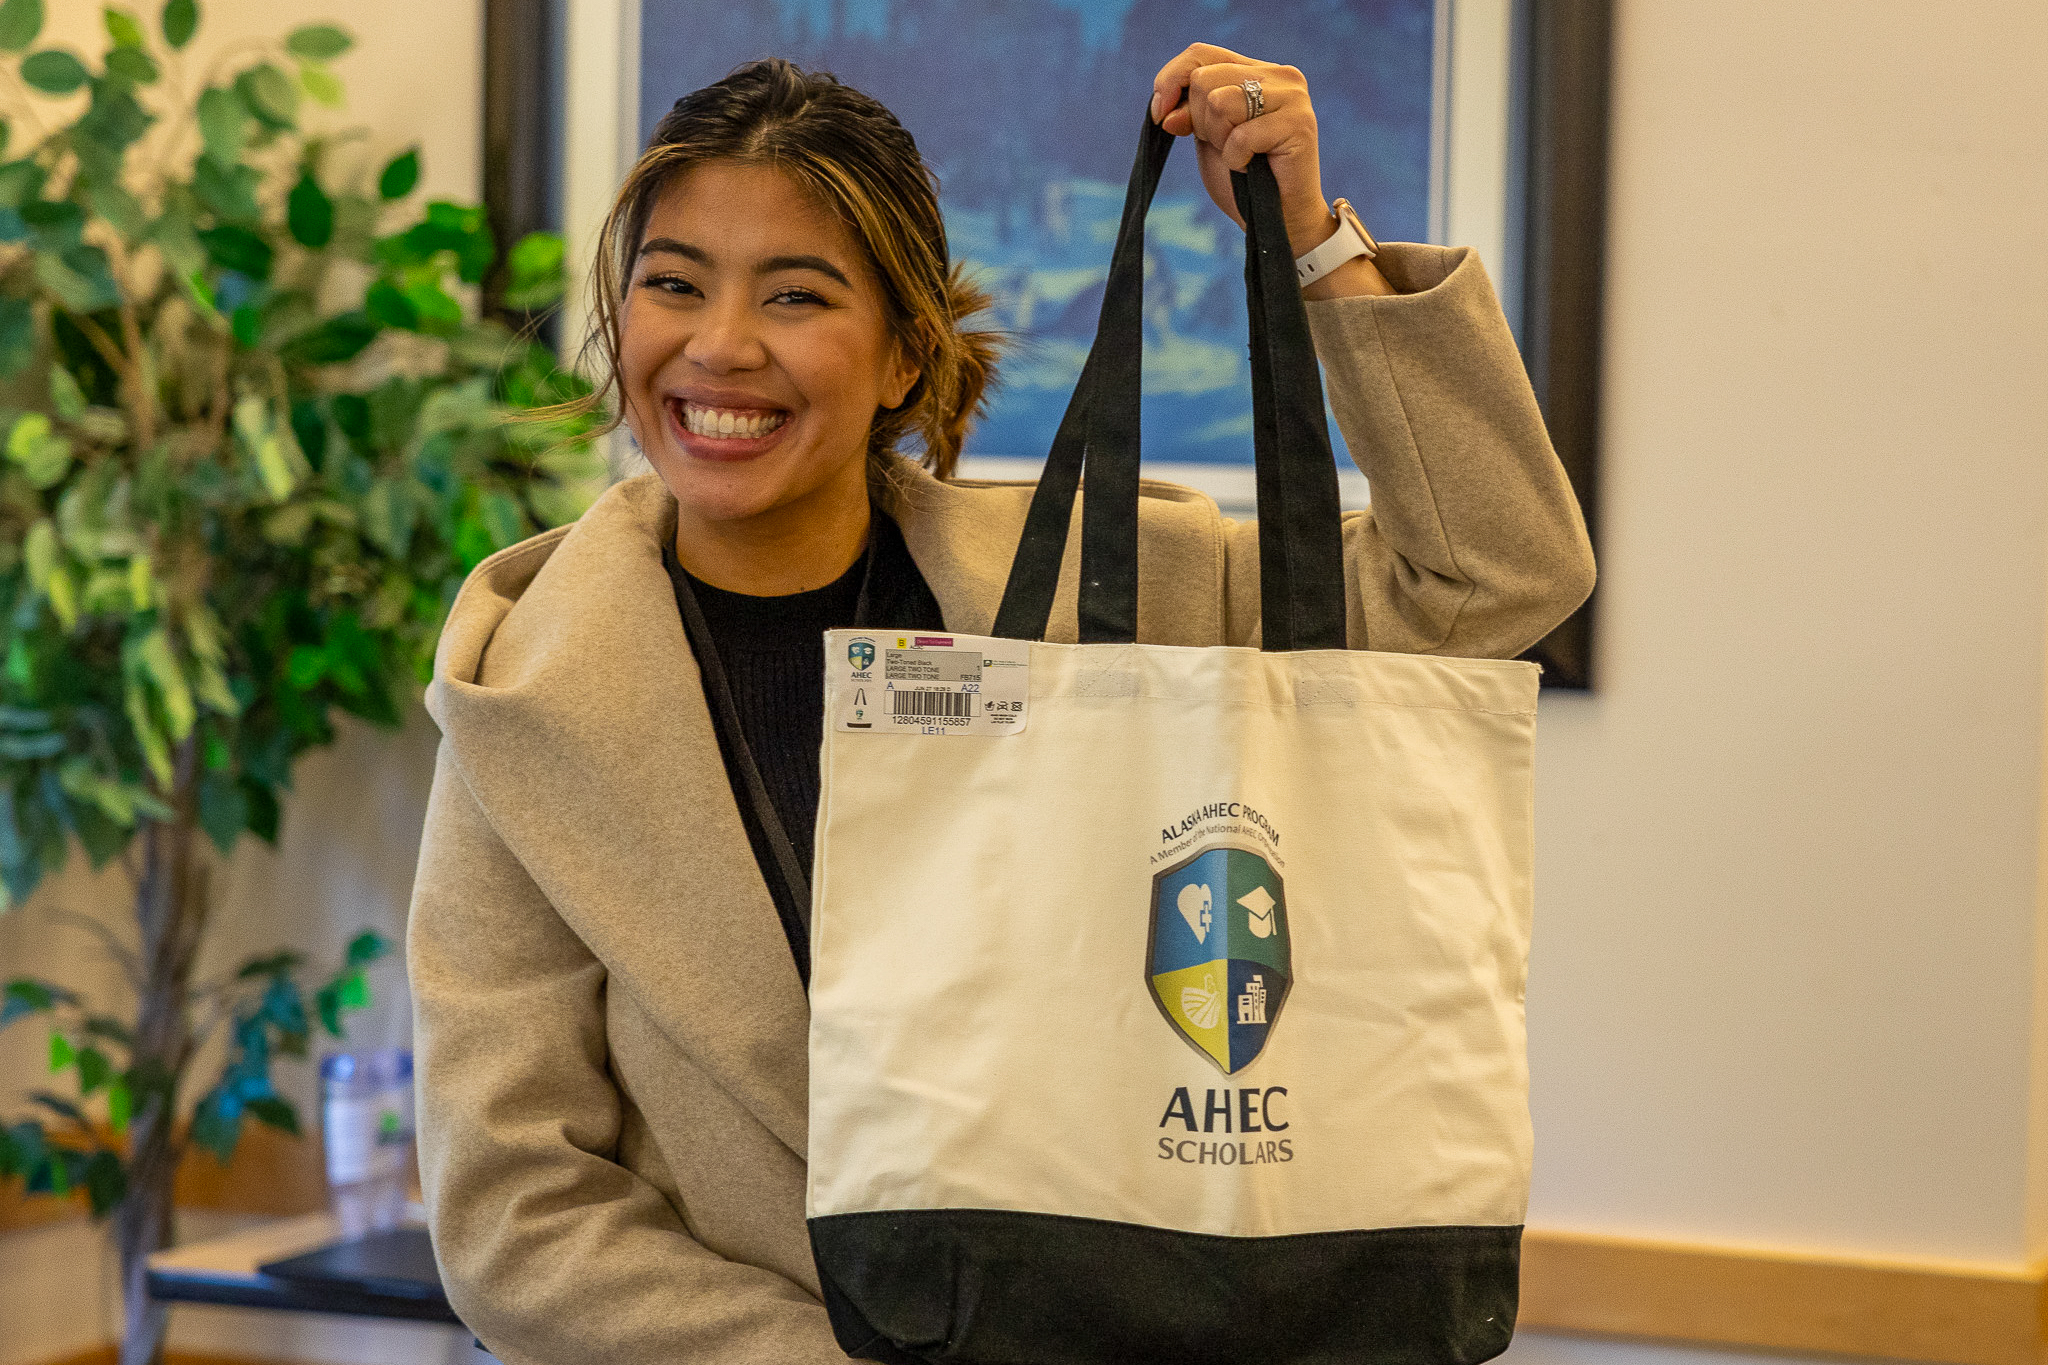 A woman holding up an AHEC swag bag